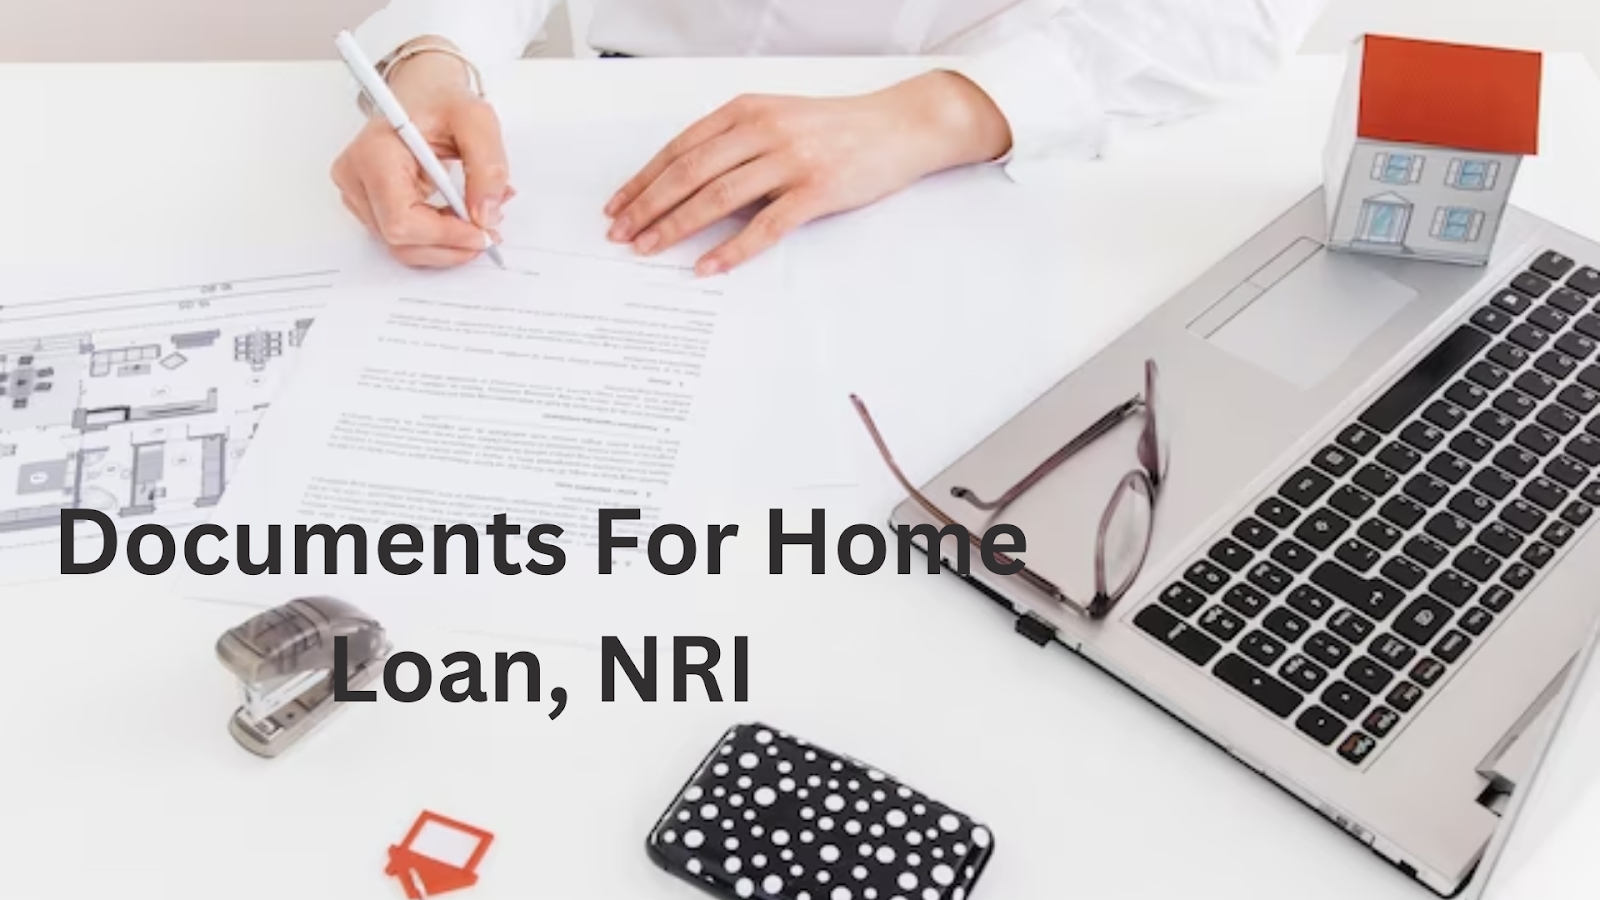 Essential documents for NRIs applying for a home loan.